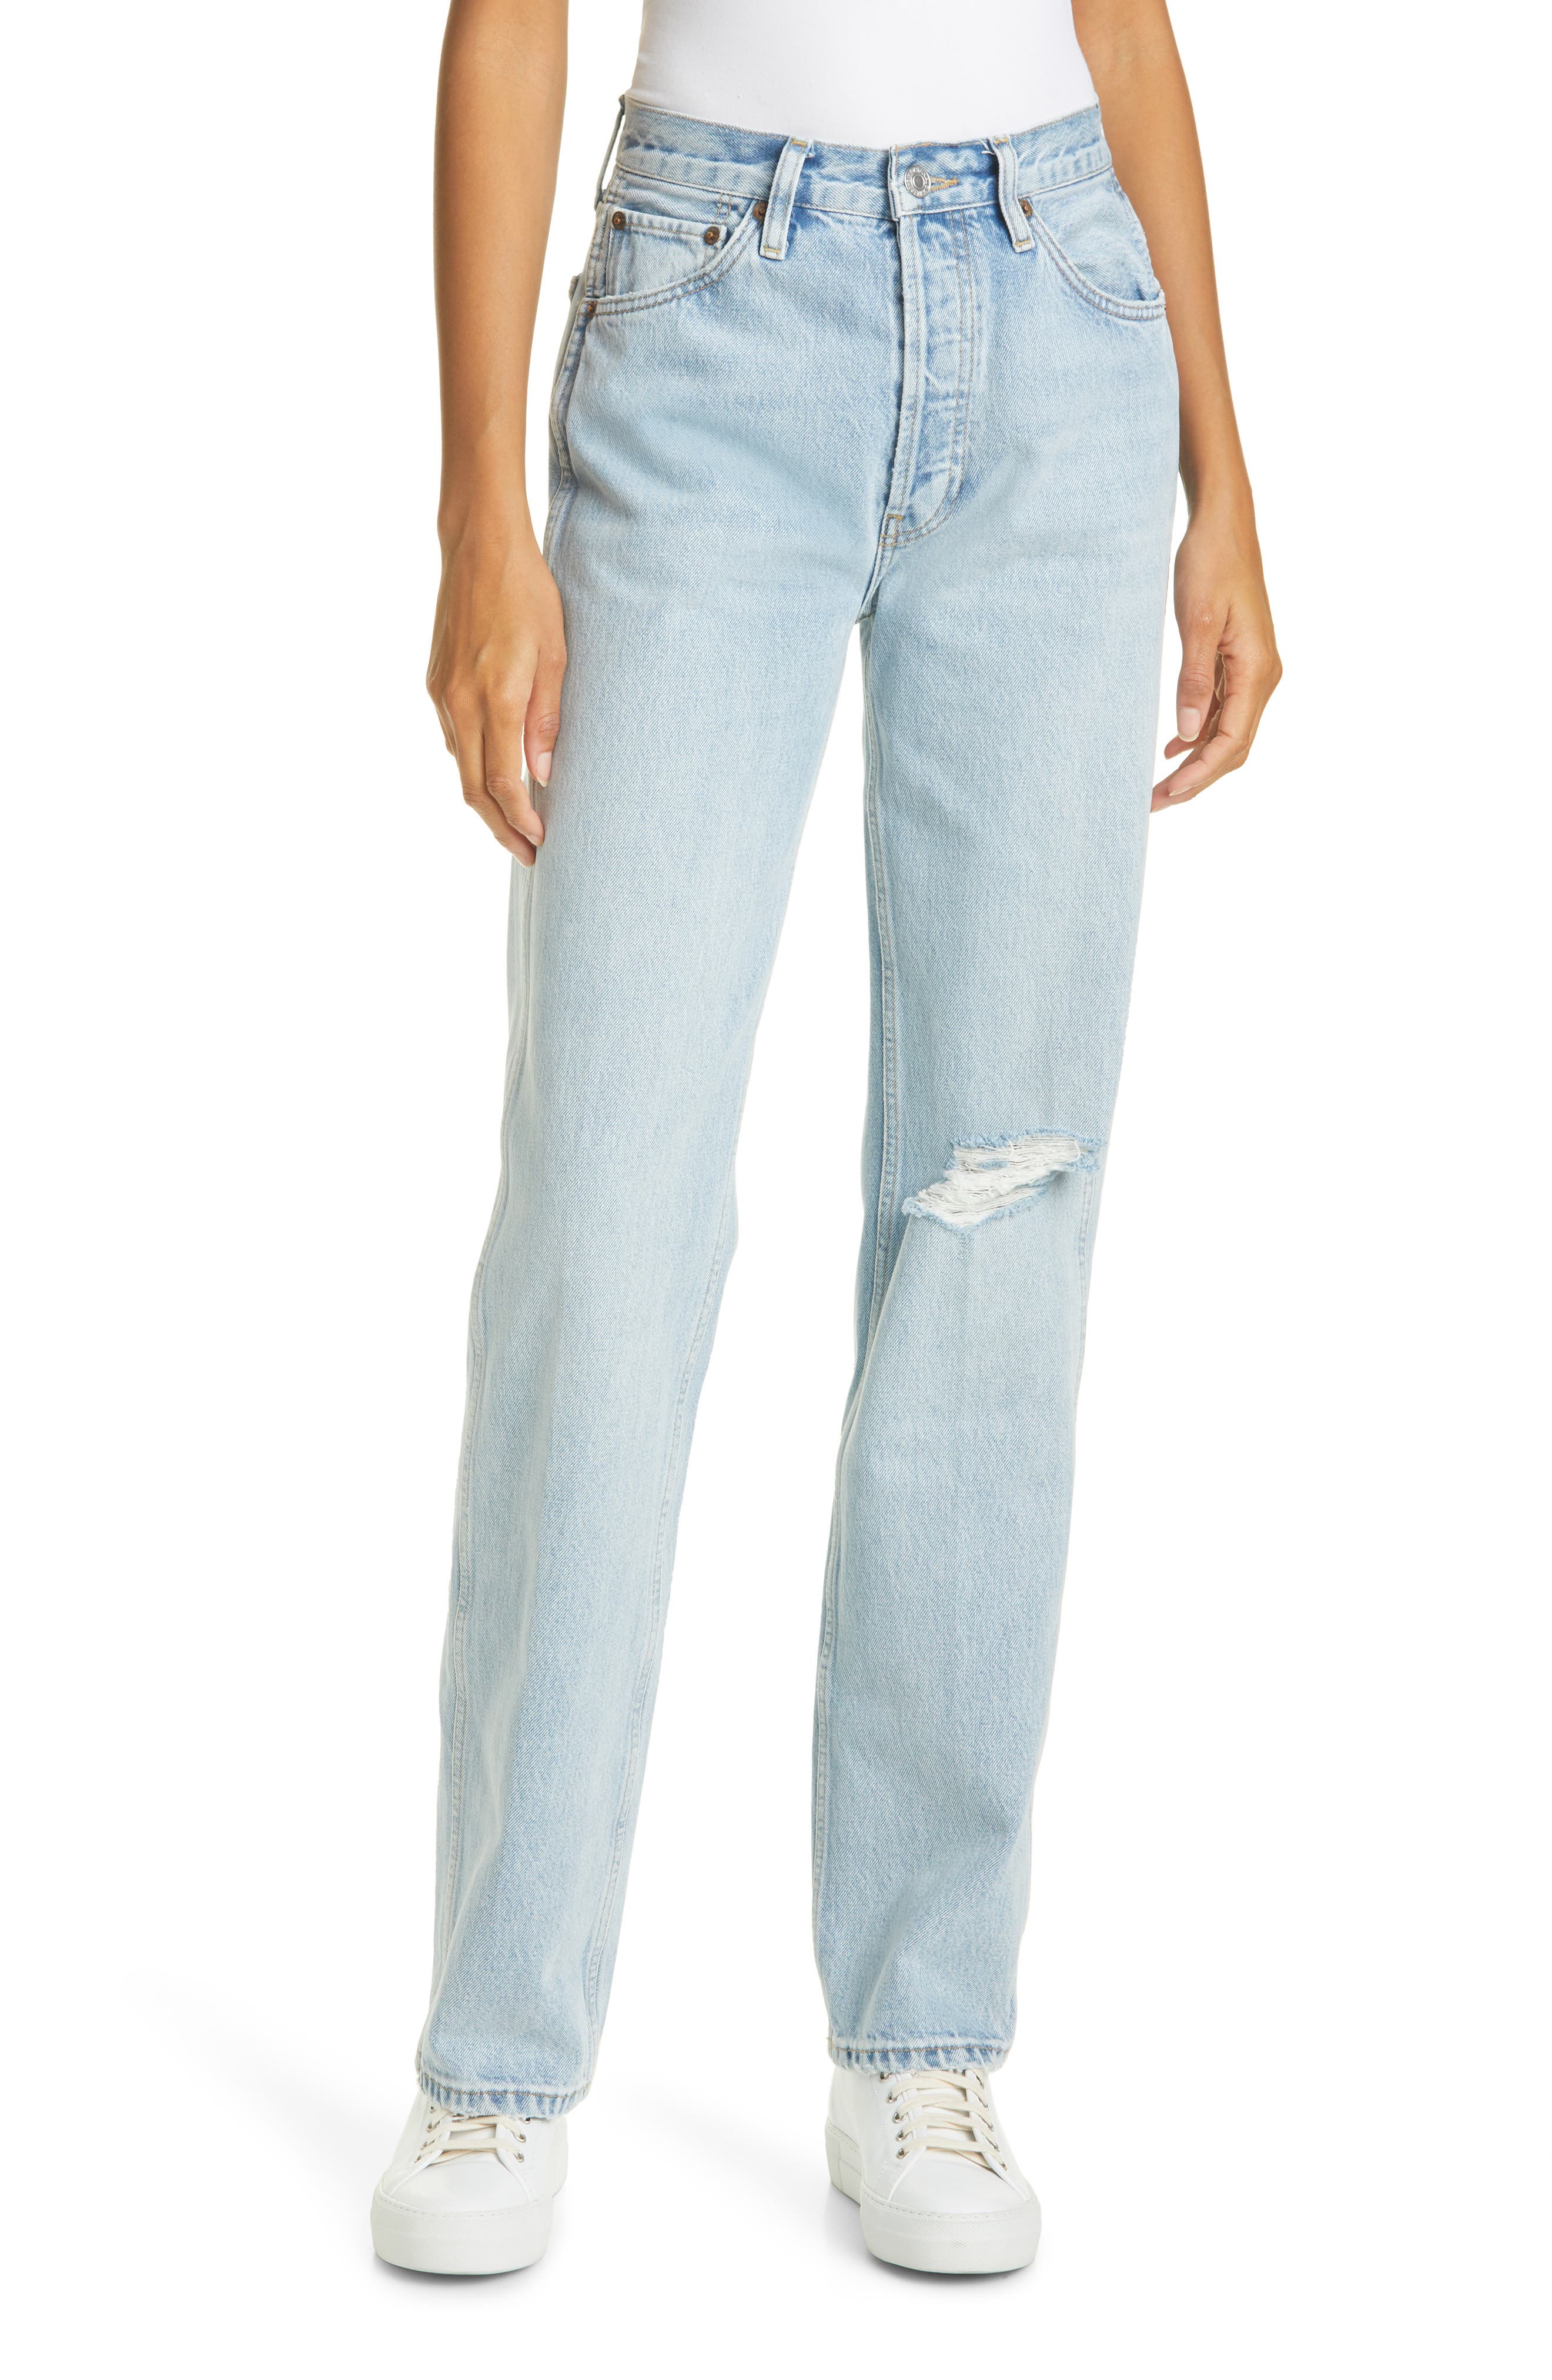 redone loose jeans